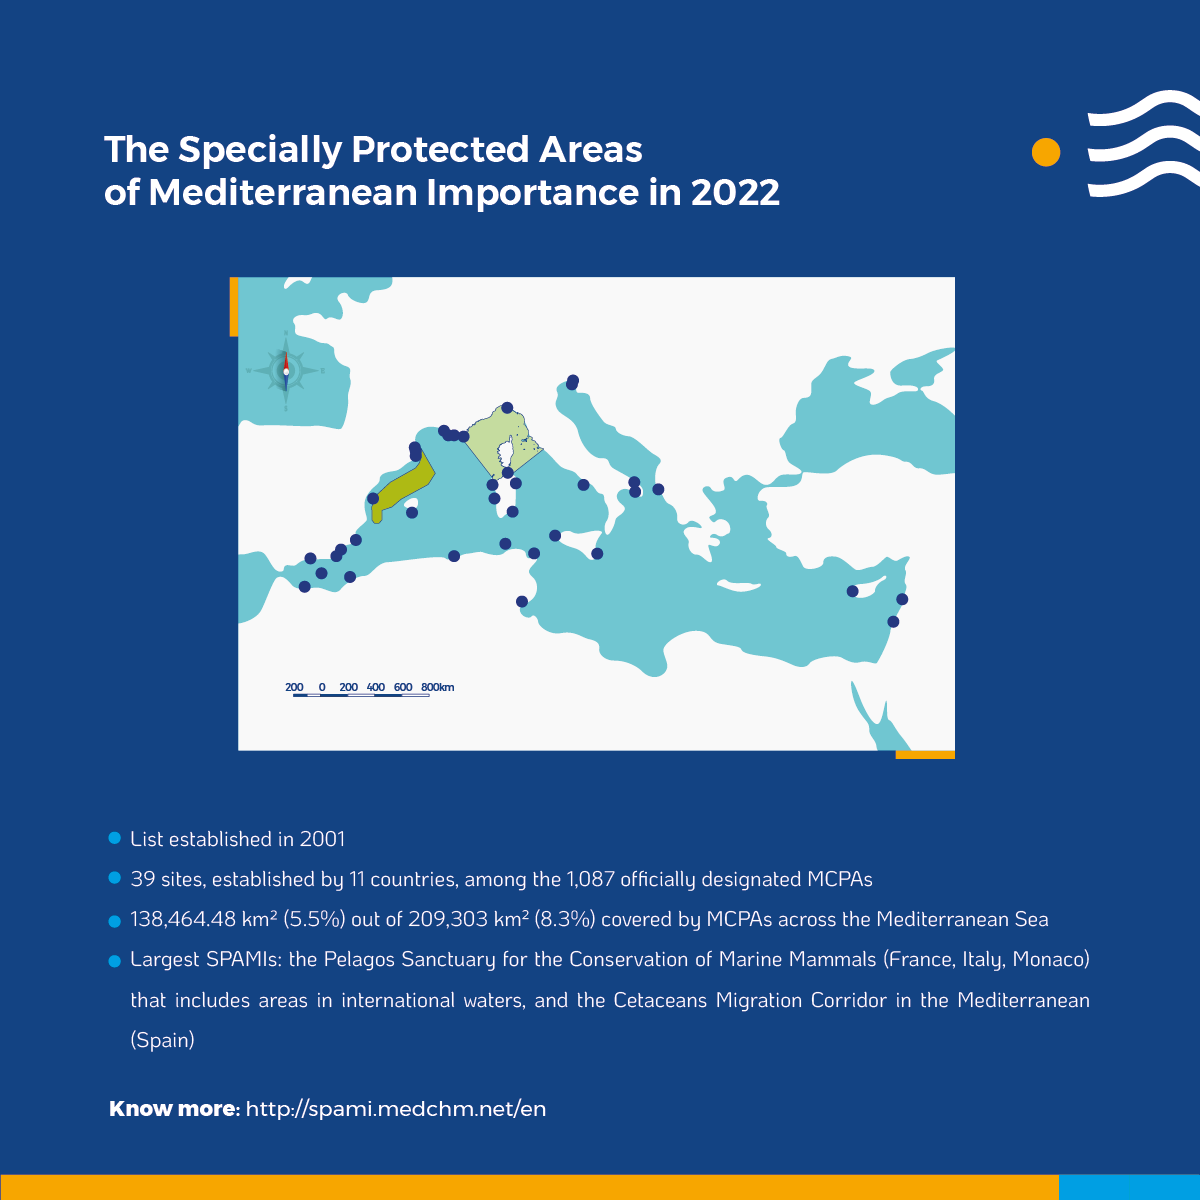 SPAMIs have a demonstrative effect that can be harnessed to scale up solutions and best practices. But as other Marine Protected Areas in the Mediterranean, they need a boost.
We explain how bit.ly/3MtxW46
#SPAMIday2022 #ProtectMedDay